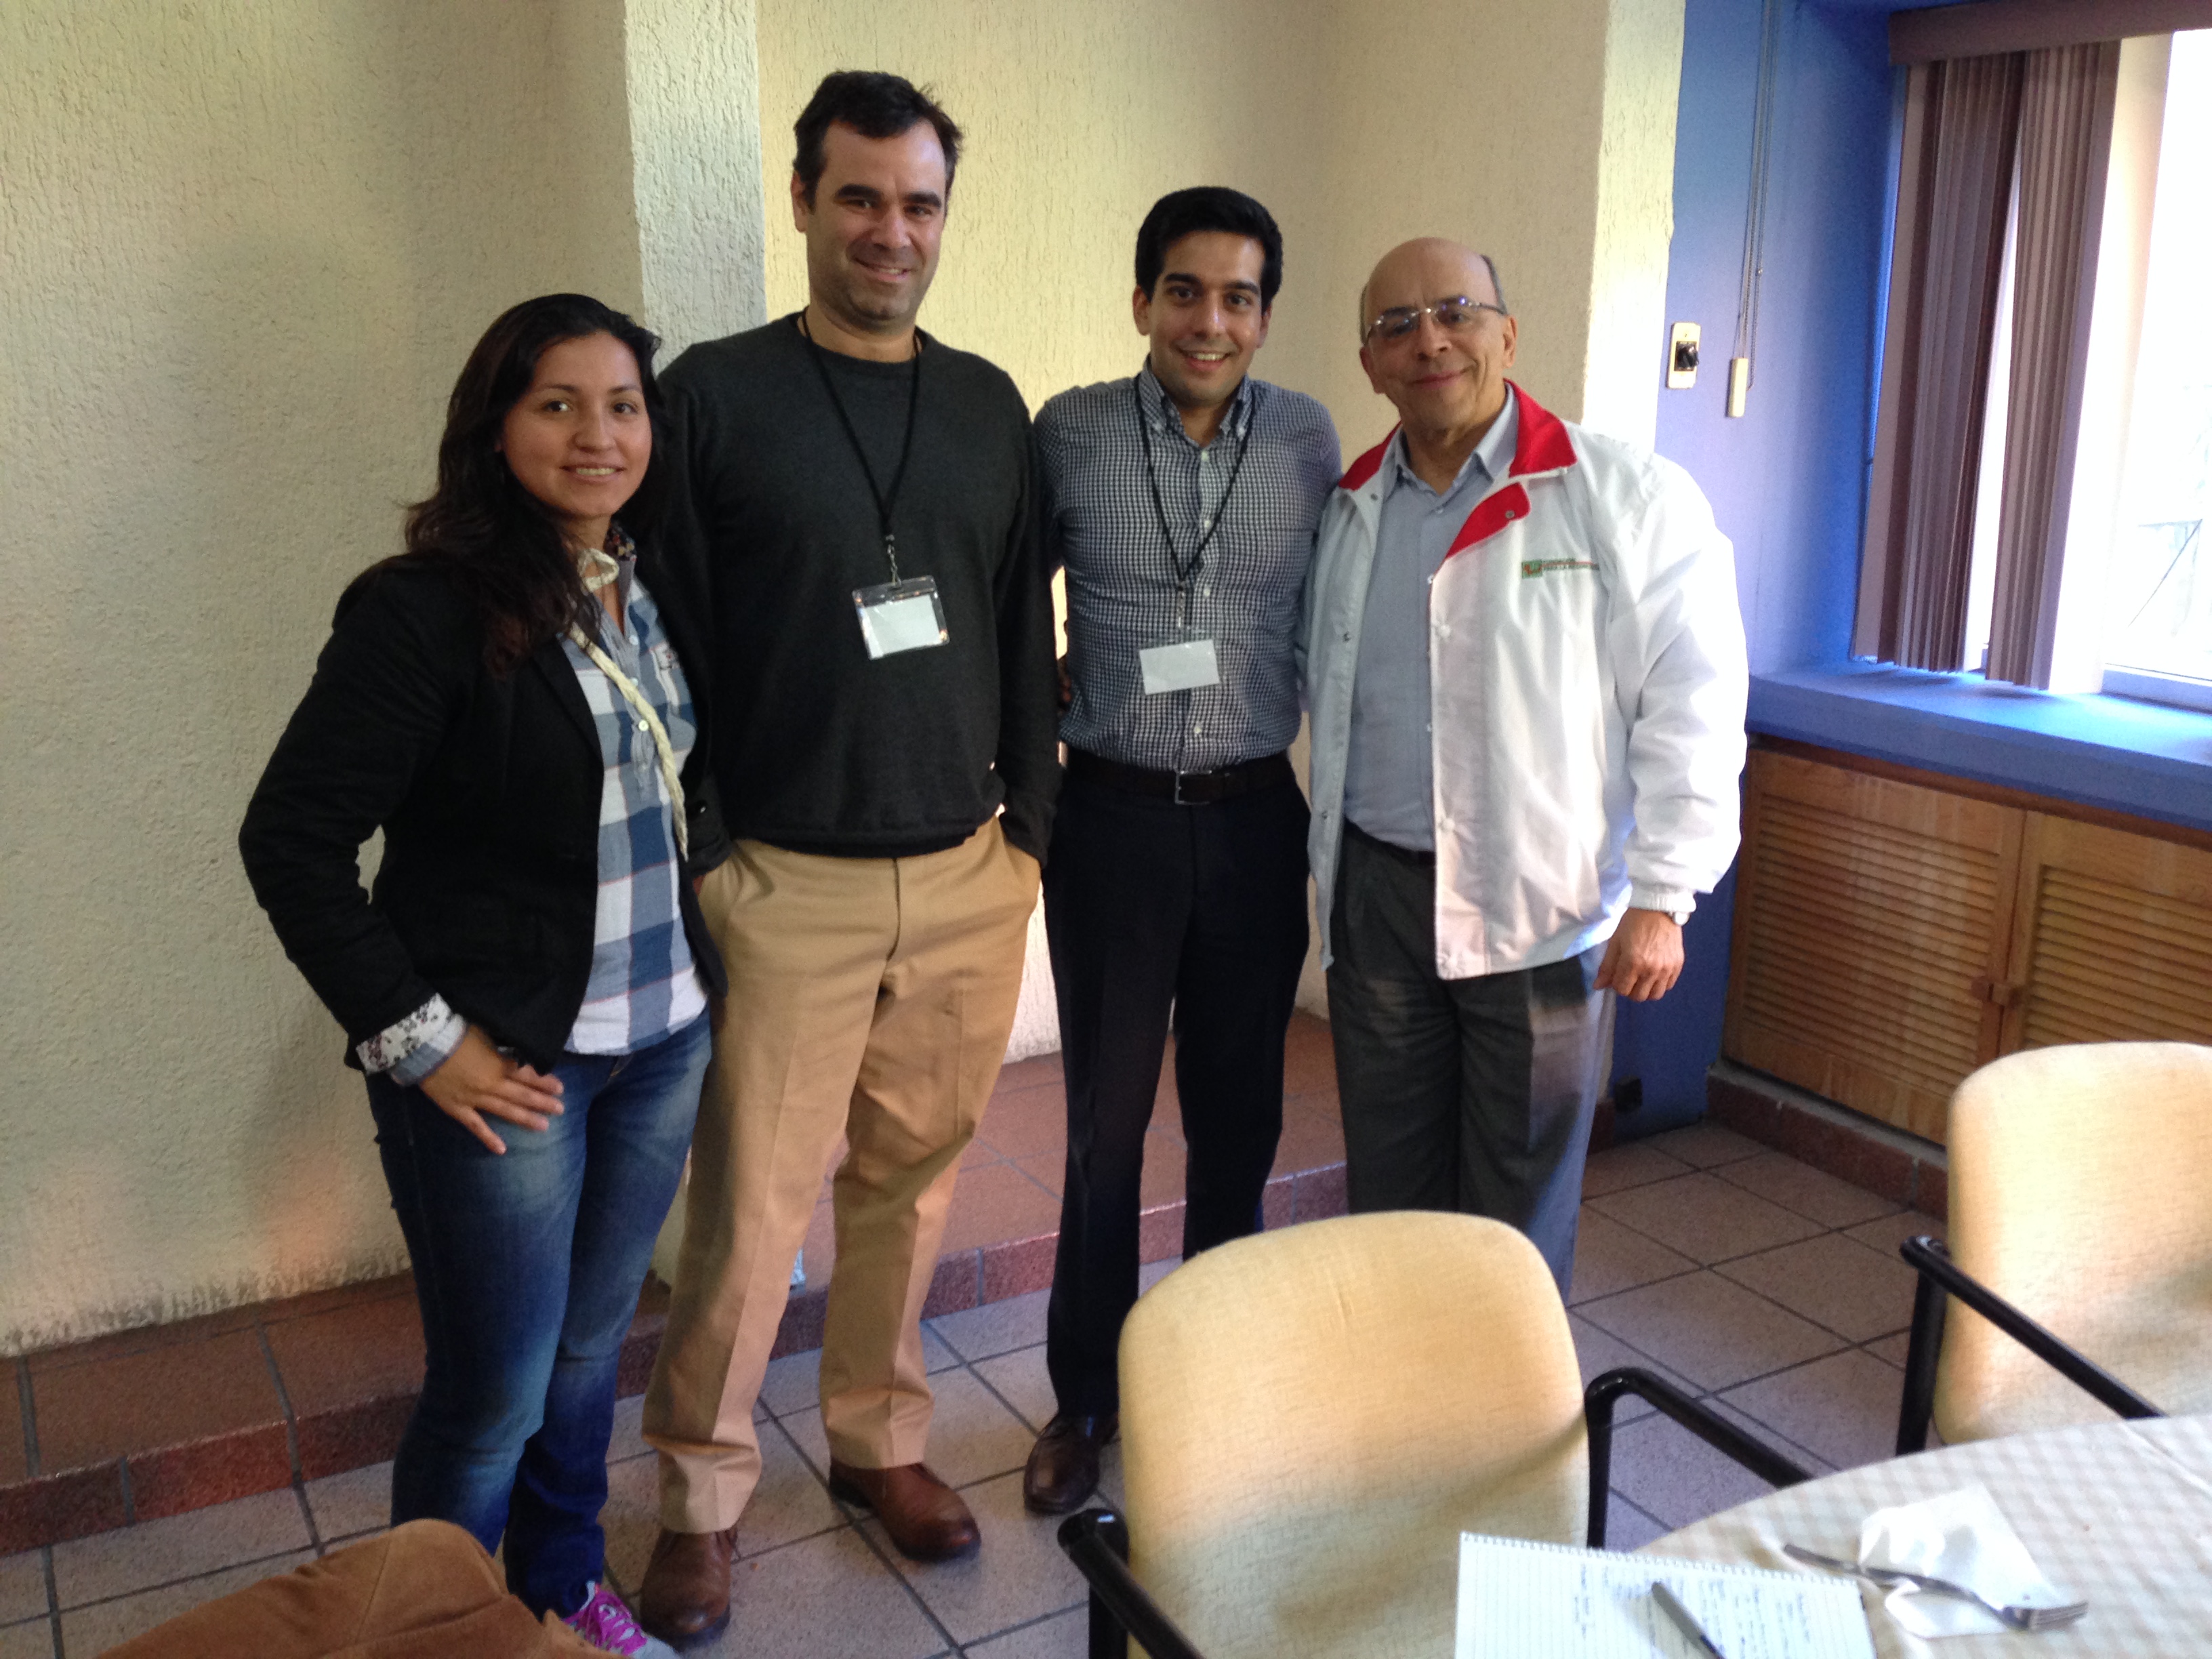 Fr. Leonel on far right, along with Global Associate Lissette Mateus Roa on left, and advisory board members, Sebastian Mosman and Akif Irfan at a recent ESPERE training in Mexico City.